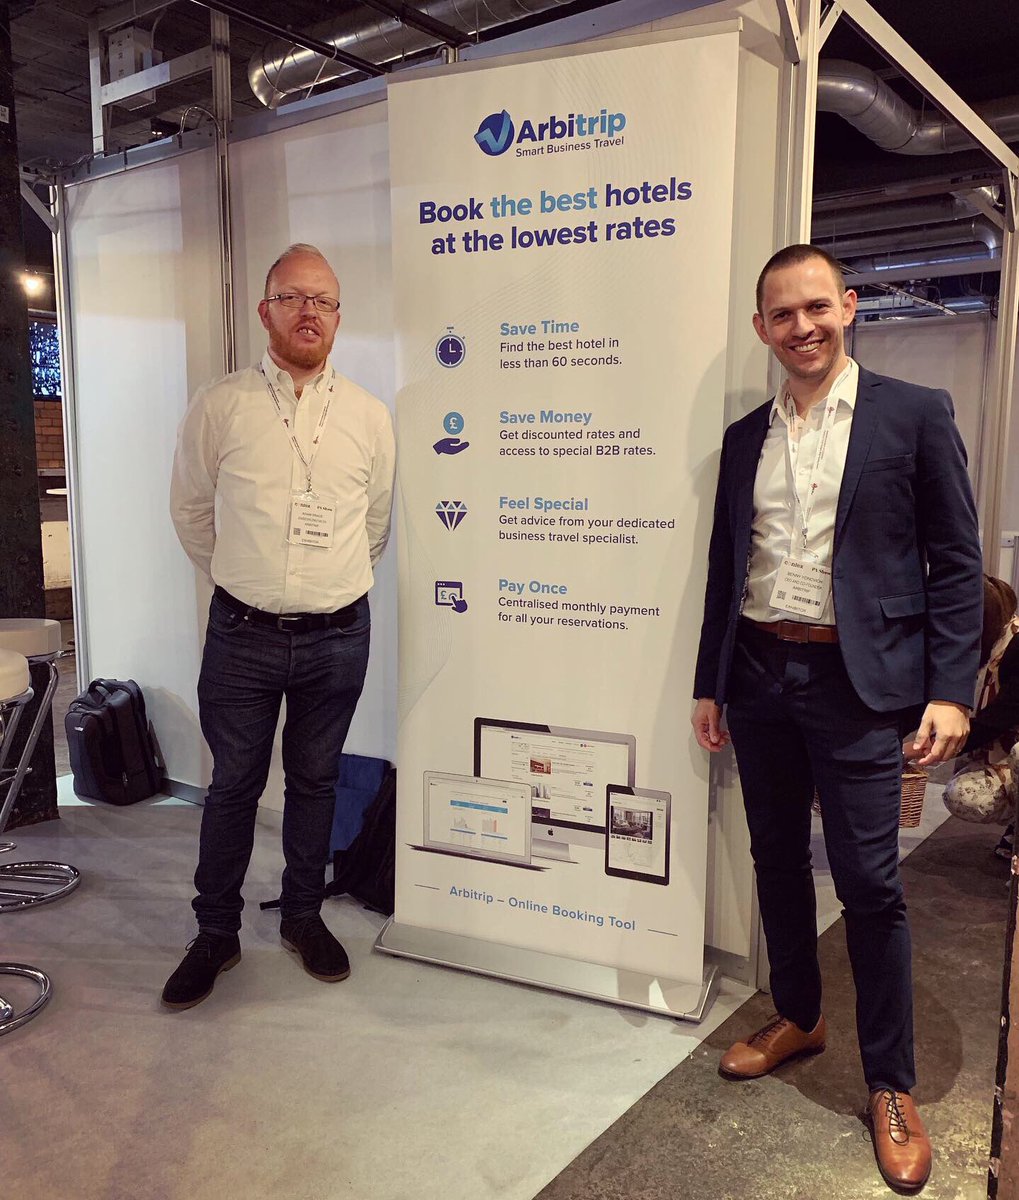 Come meet us! Today & Tomorrow #PAShow #Arbitrip #Travel #PAShow2019 #Confex #BusinessTravel #OnlineHotelBooking #TravelTech #BusinessTrip #Expo #TeamArbitrip #Exhibition #Show #OnlineHotelBooking #VictoriaWarehouse #Manchester